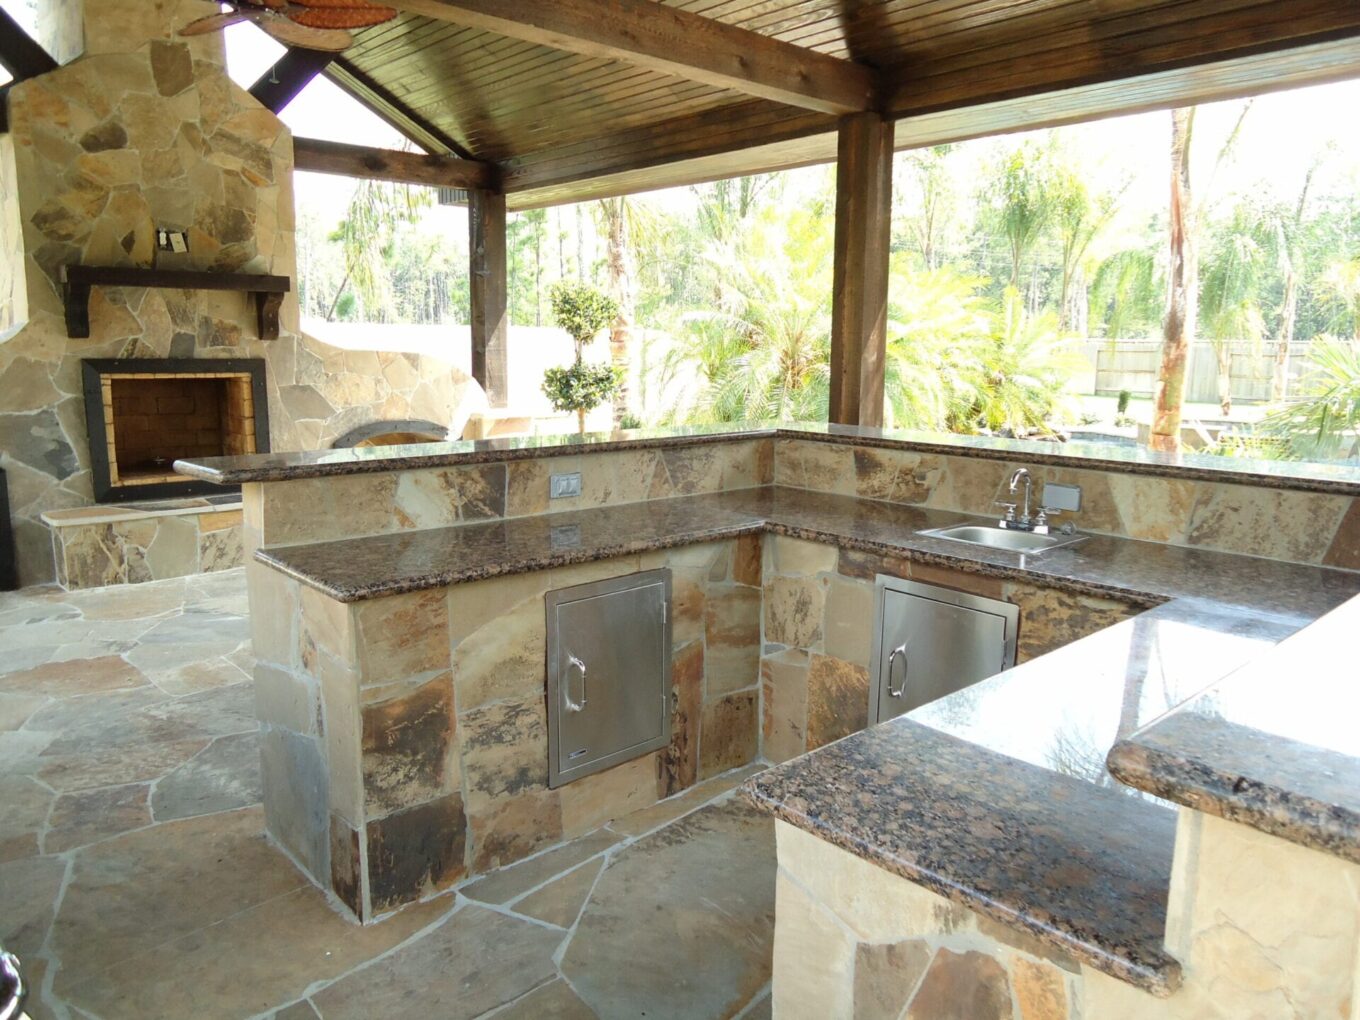 A stone kitchen with a fireplace and a large open area.